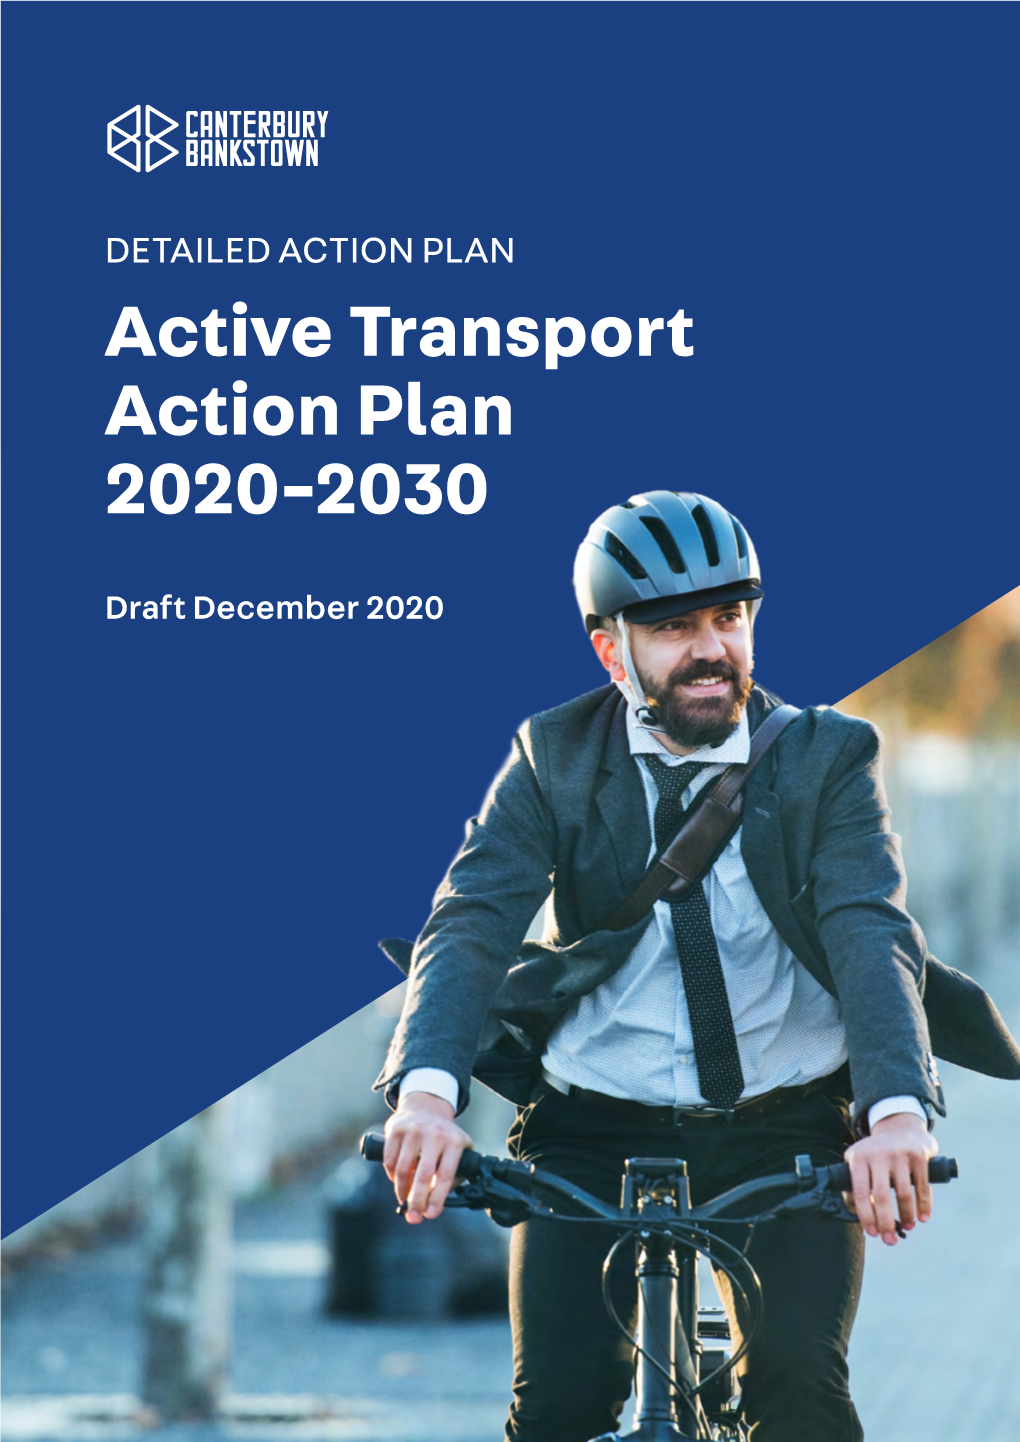 Active Transport Action Plan 2020-2030